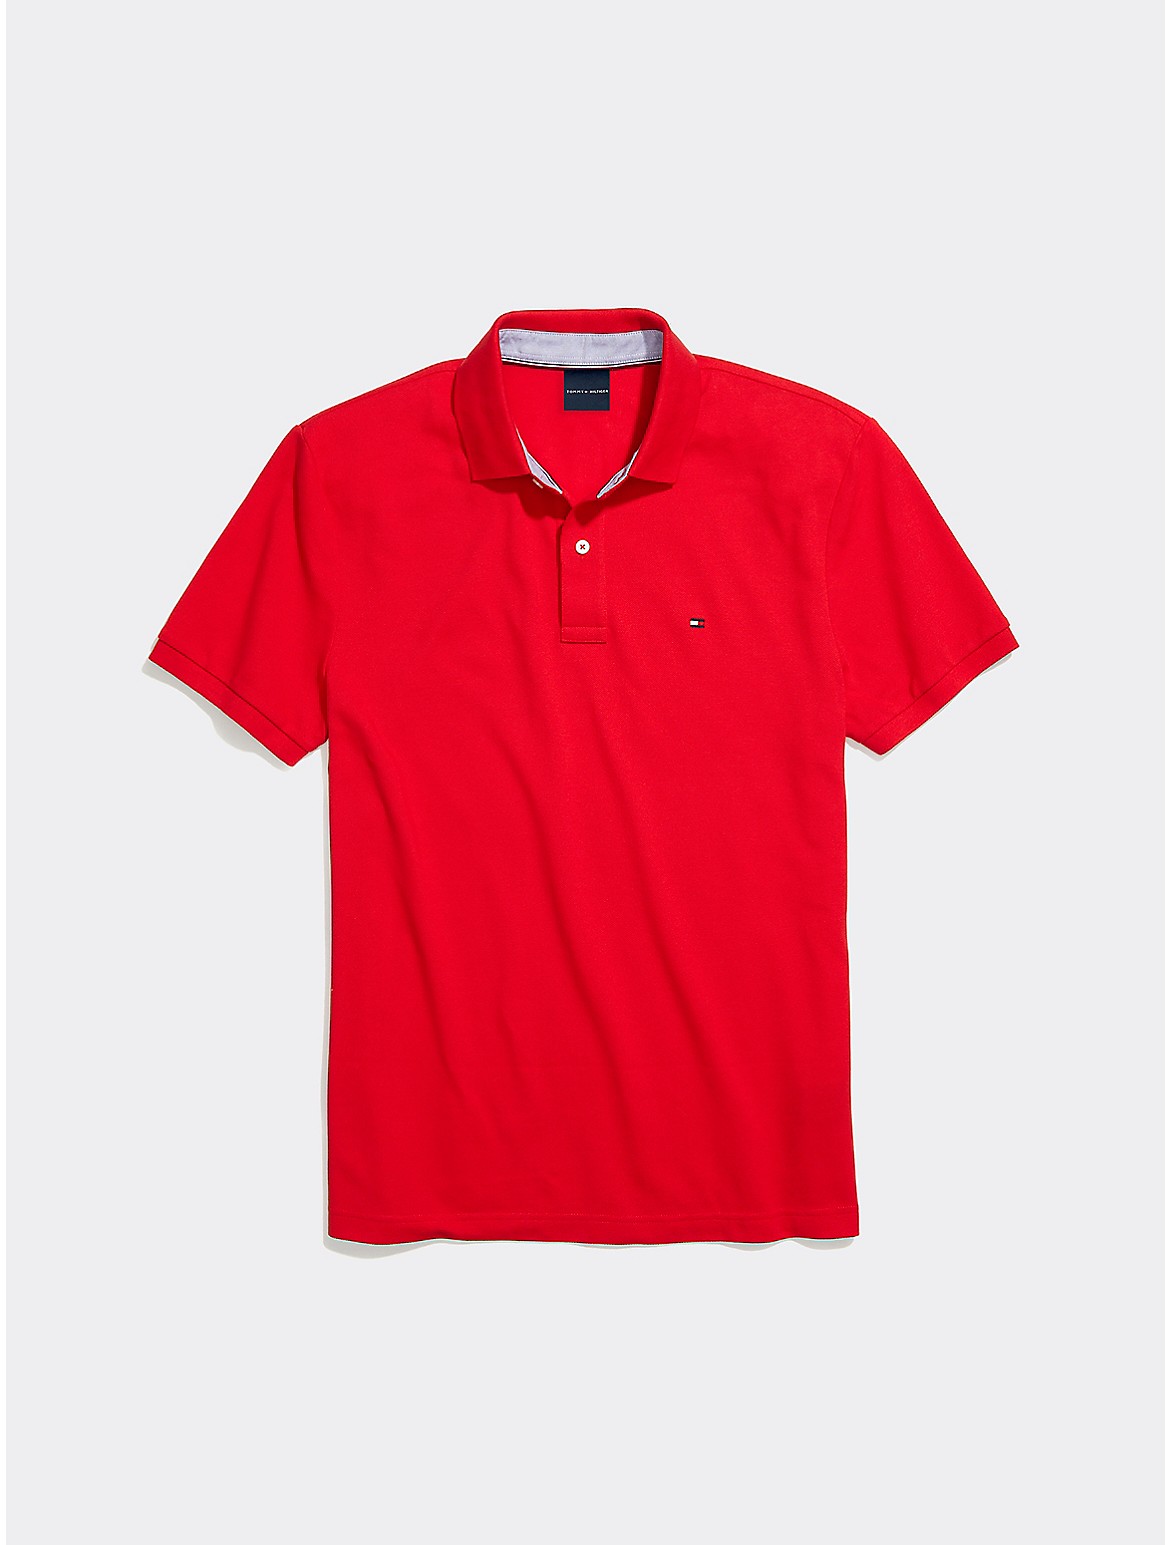 Tommy Hilfiger Men's Custom Fit Polo